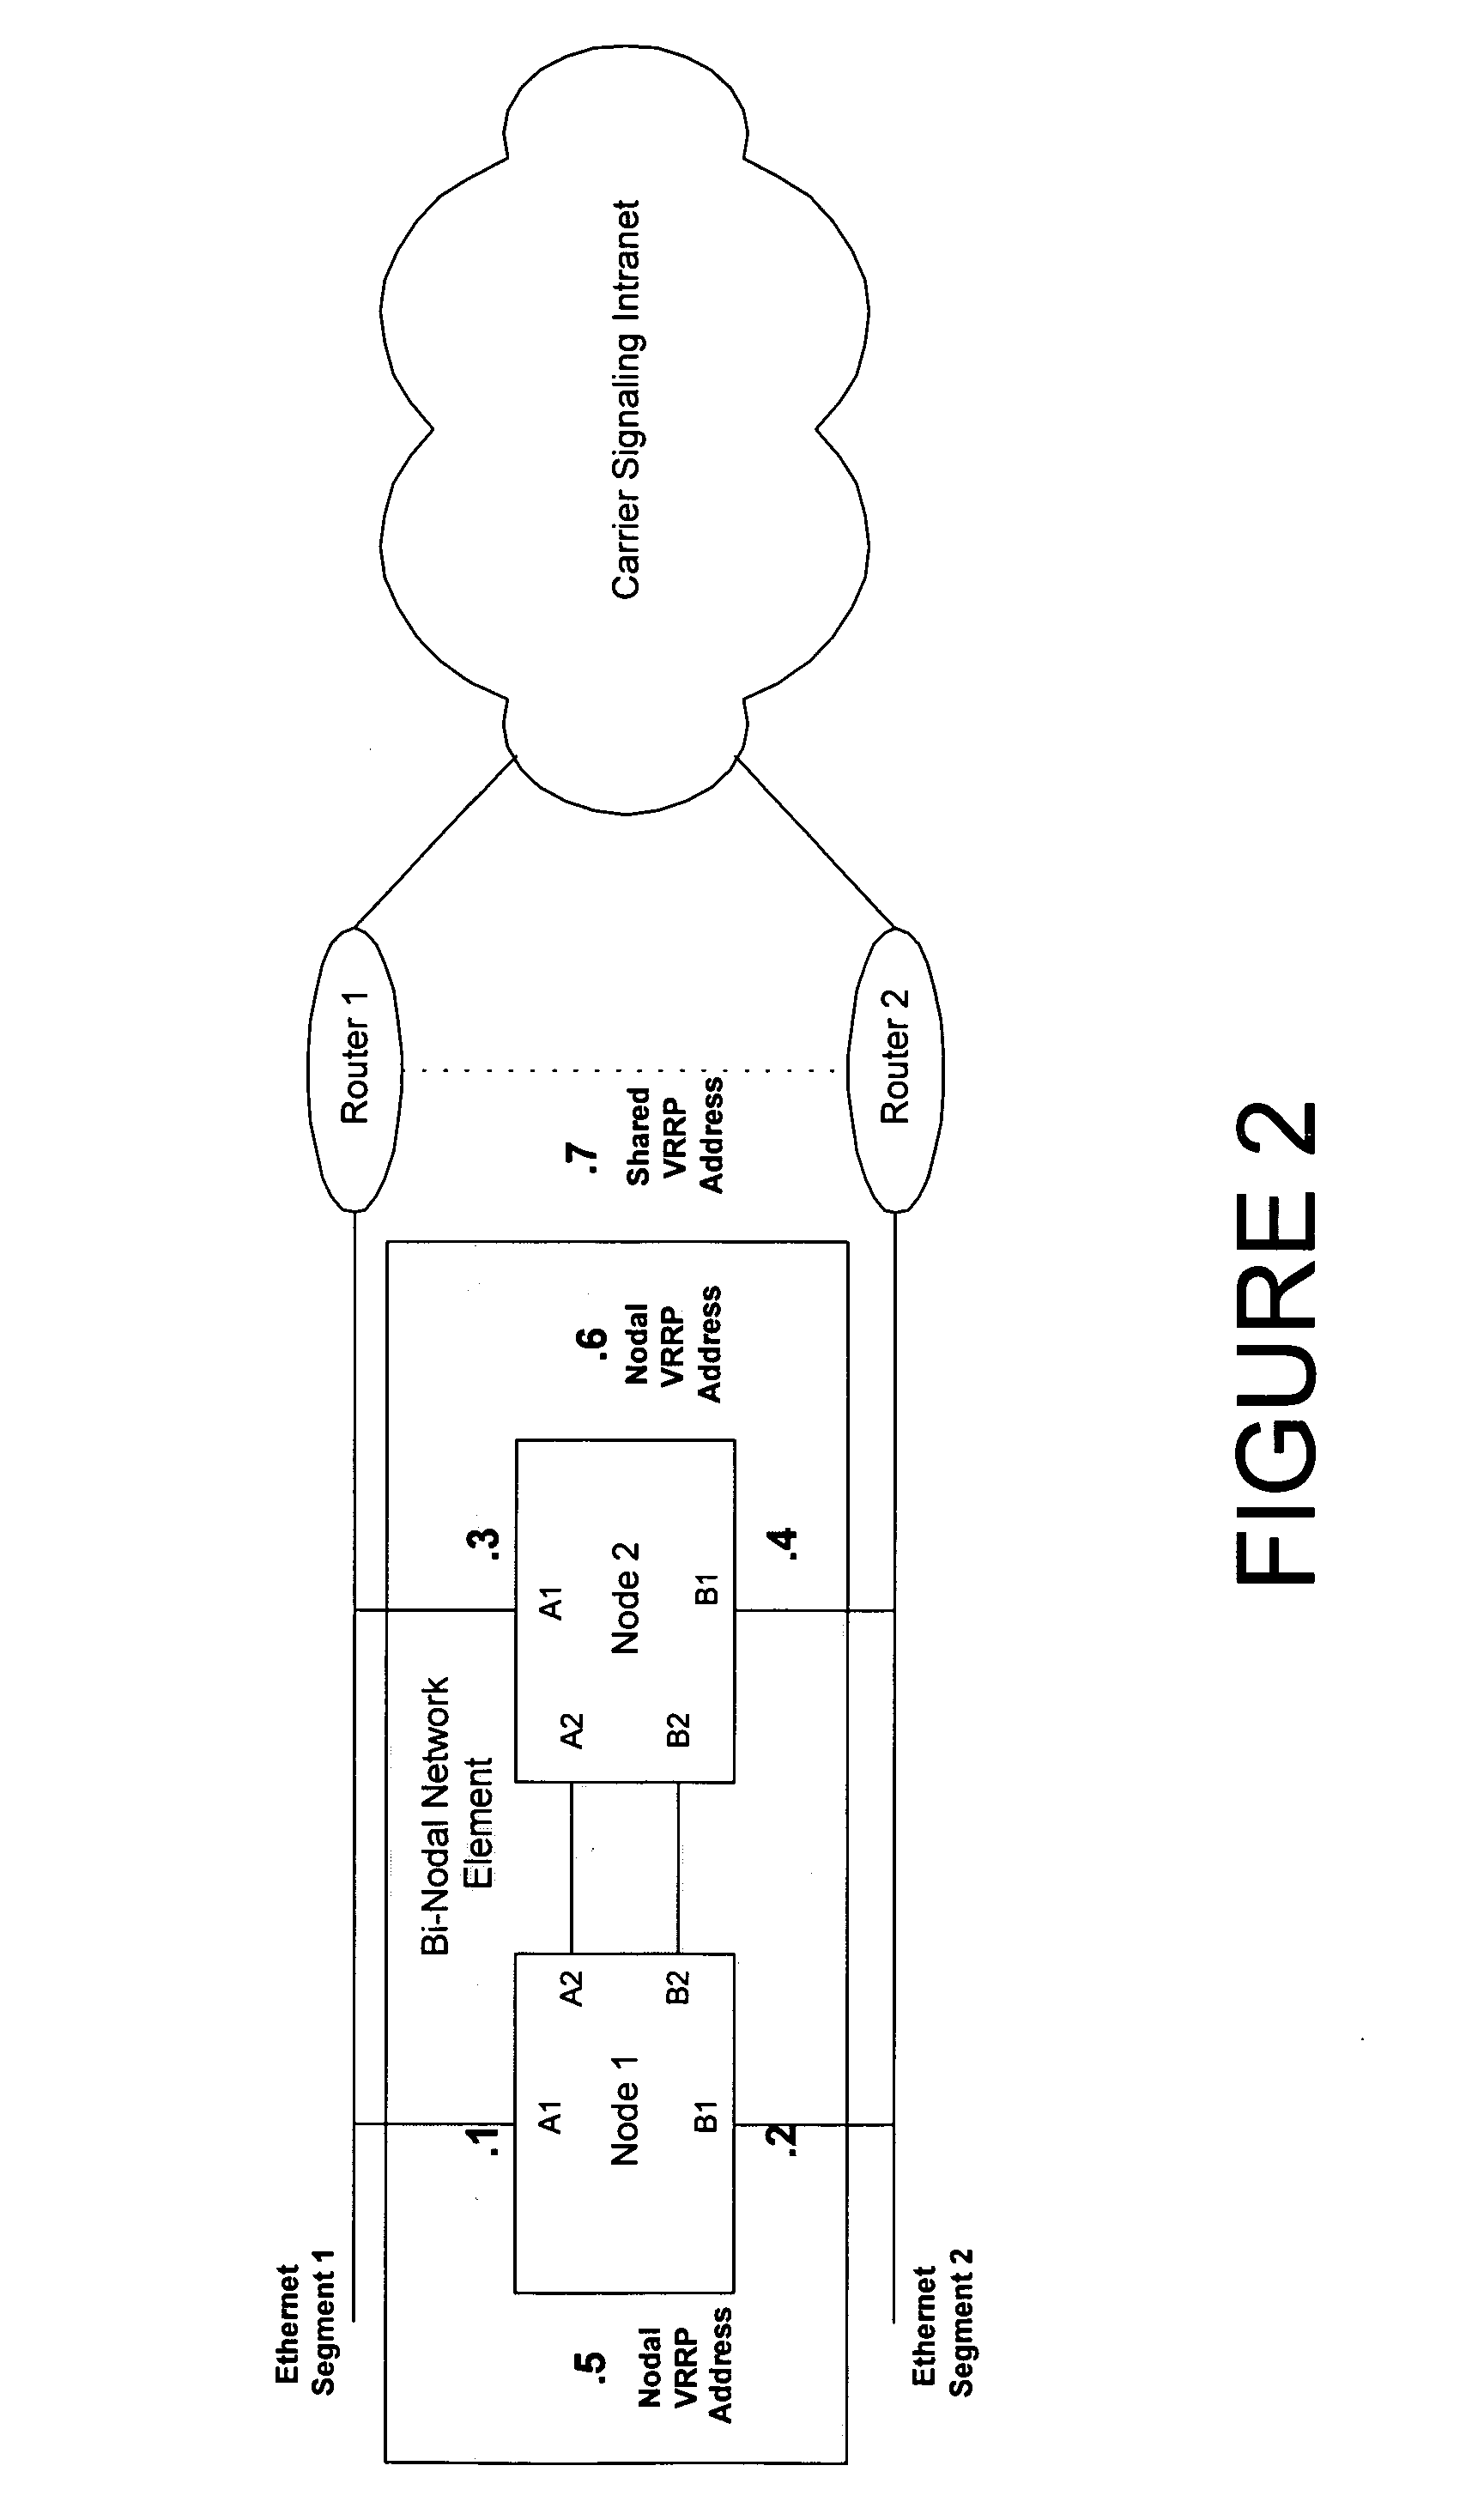 Systems and methods for communicating with bi-nodal network elements